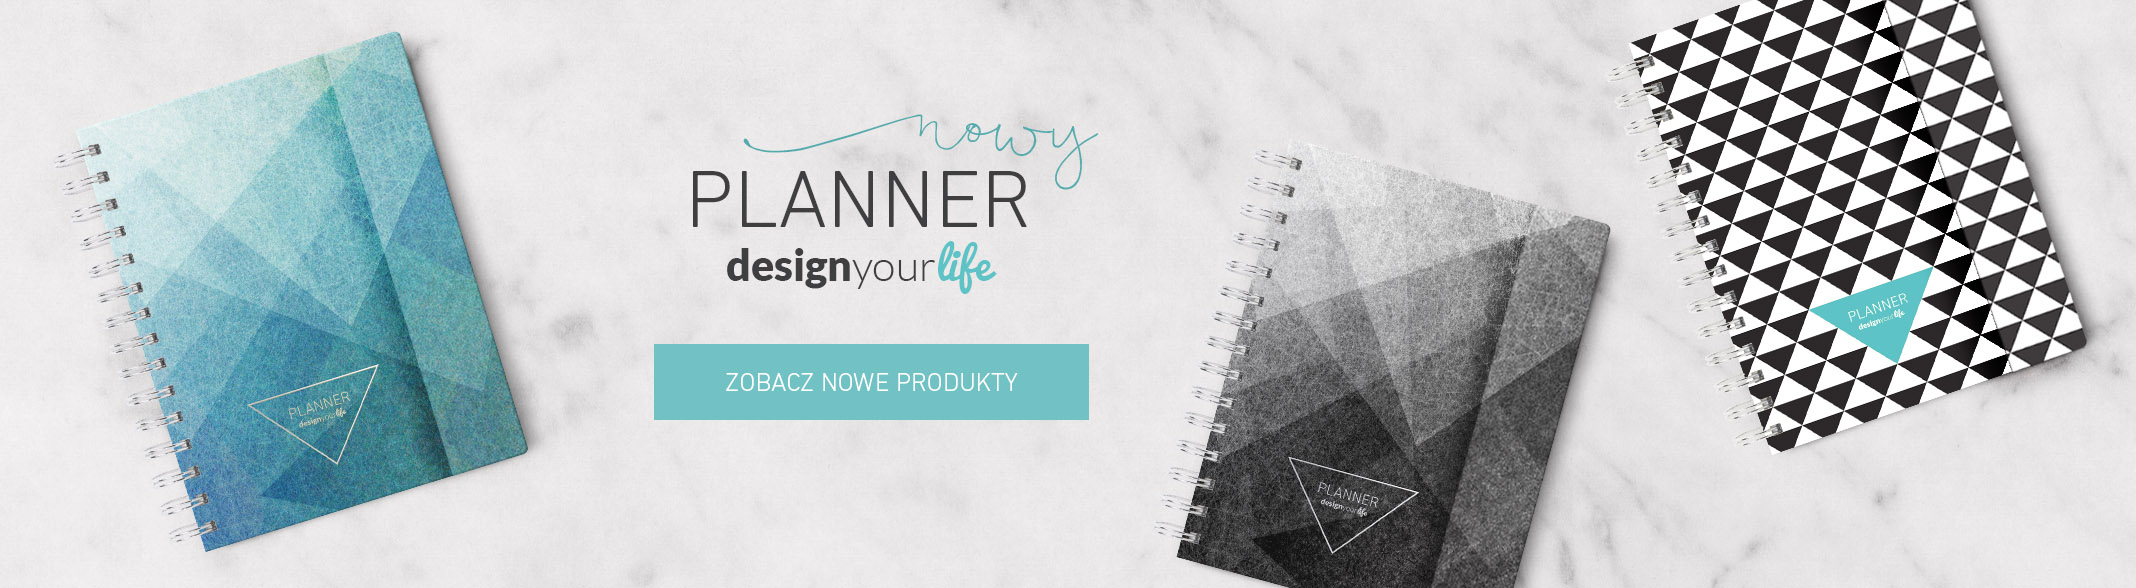 PLANNER DESIGN YOUR LIFE